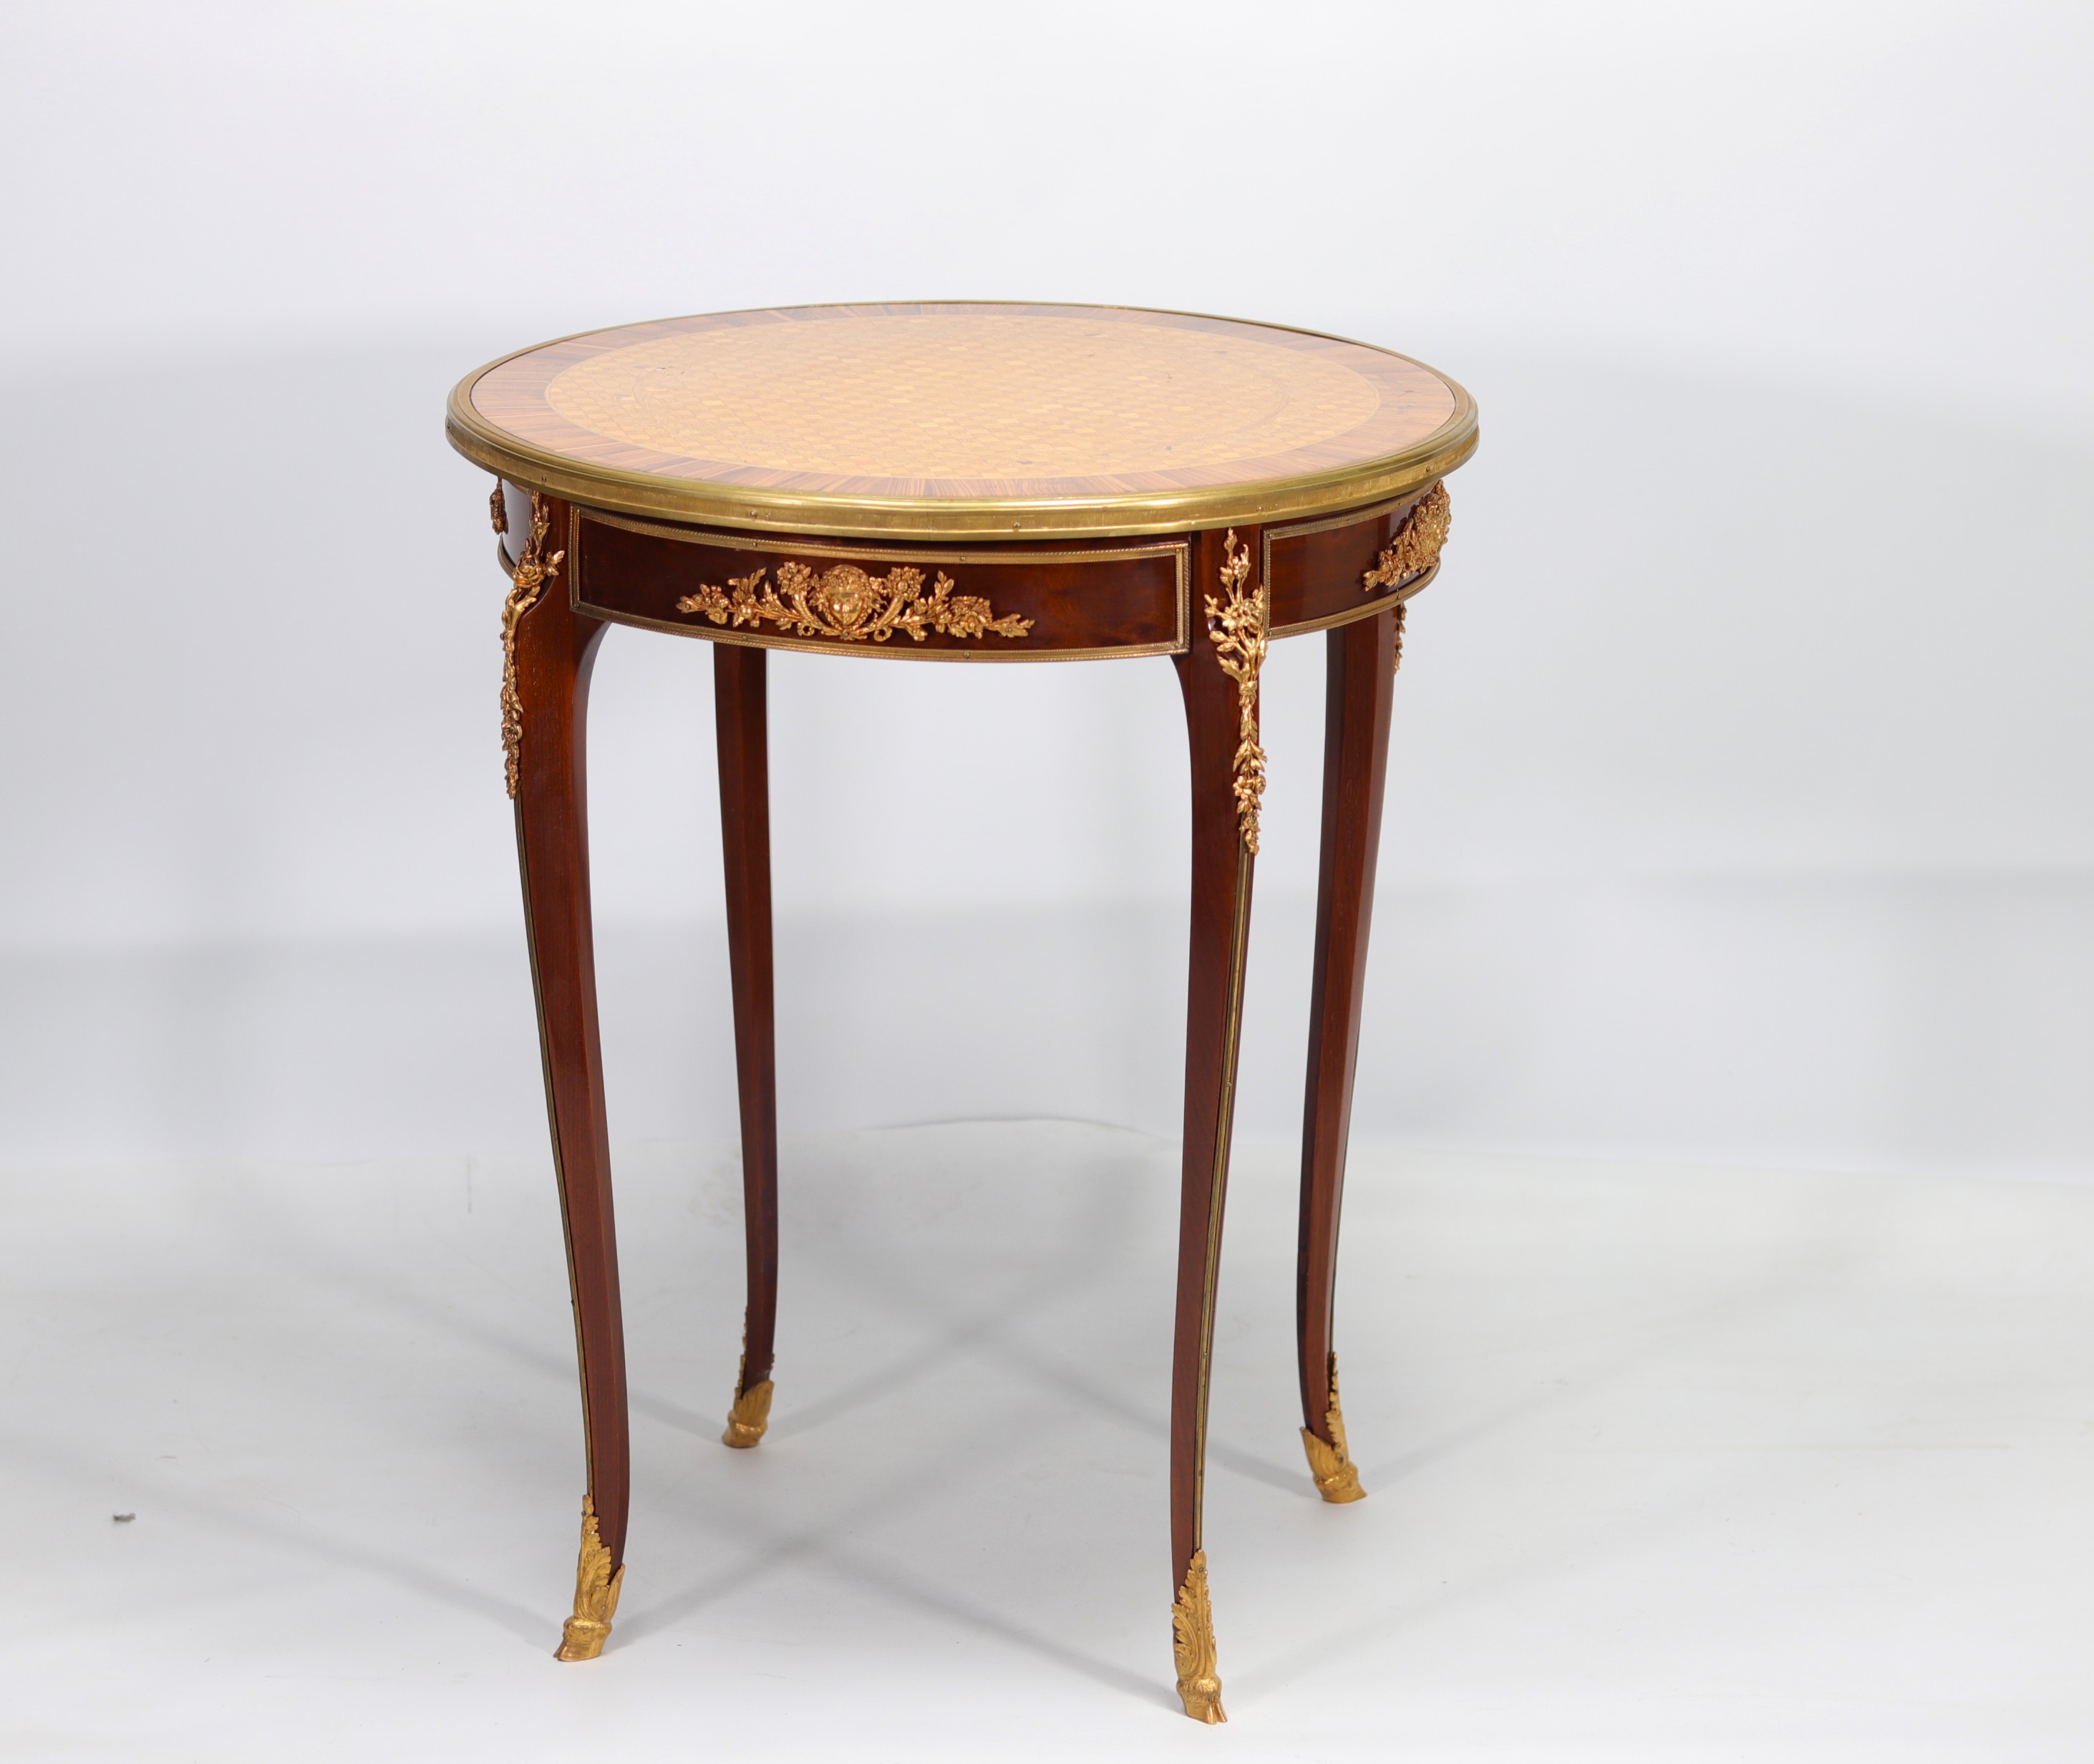 Small marquetry and ormolu pedestal table in the style of Adam WEISWEILER (1744-1820) - Image 3 of 4